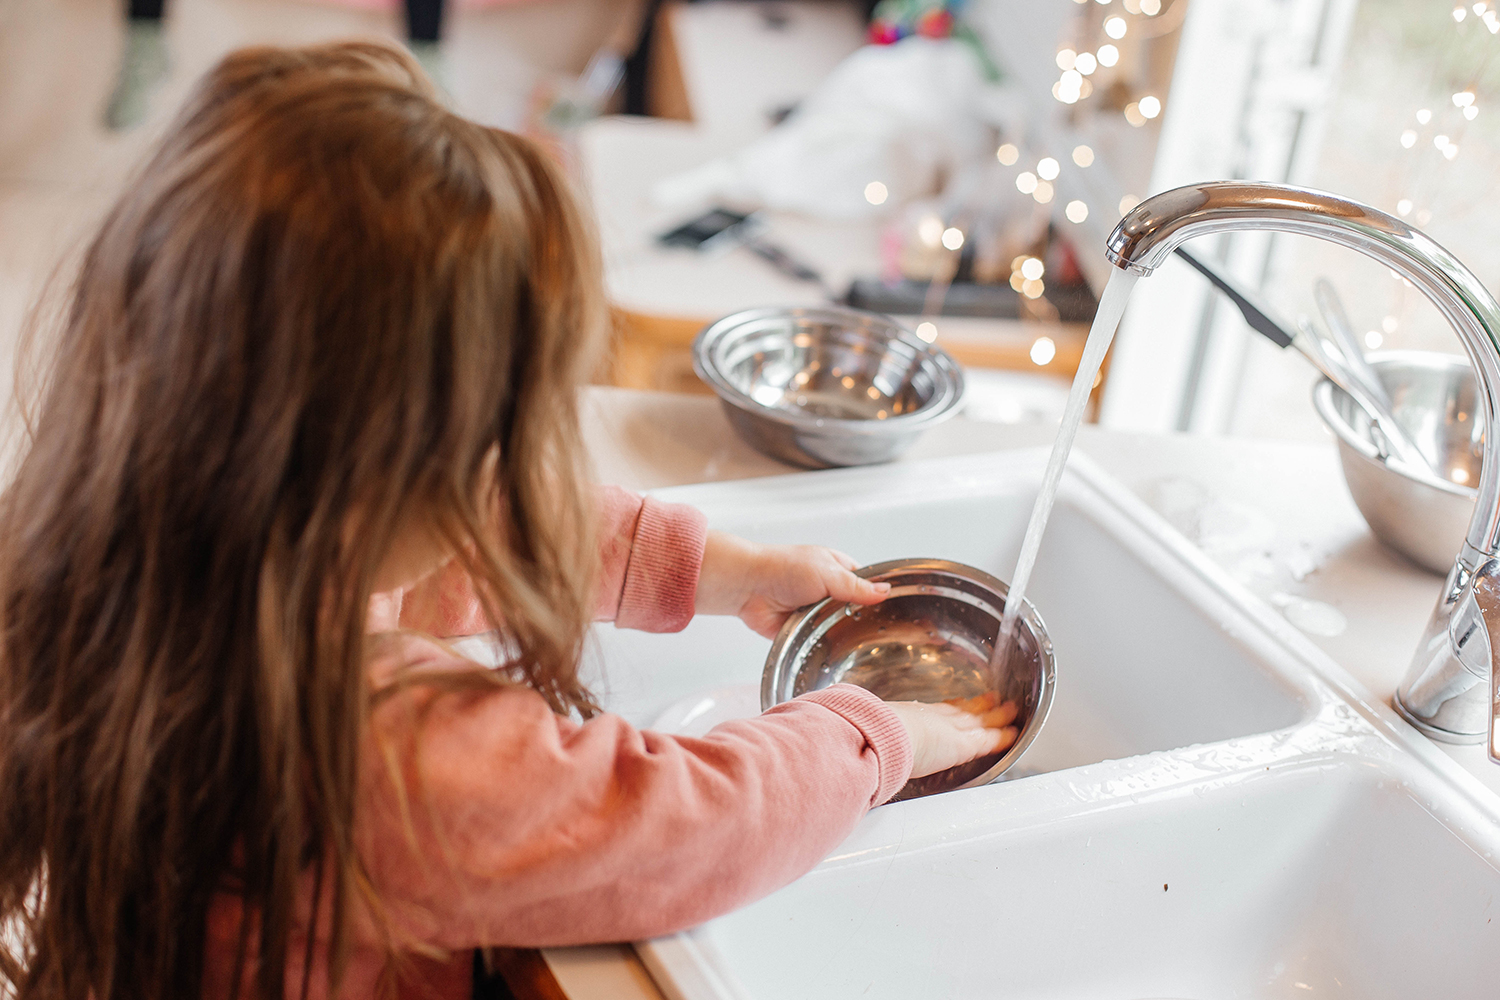 Young child washing dishes in a trailer or RV